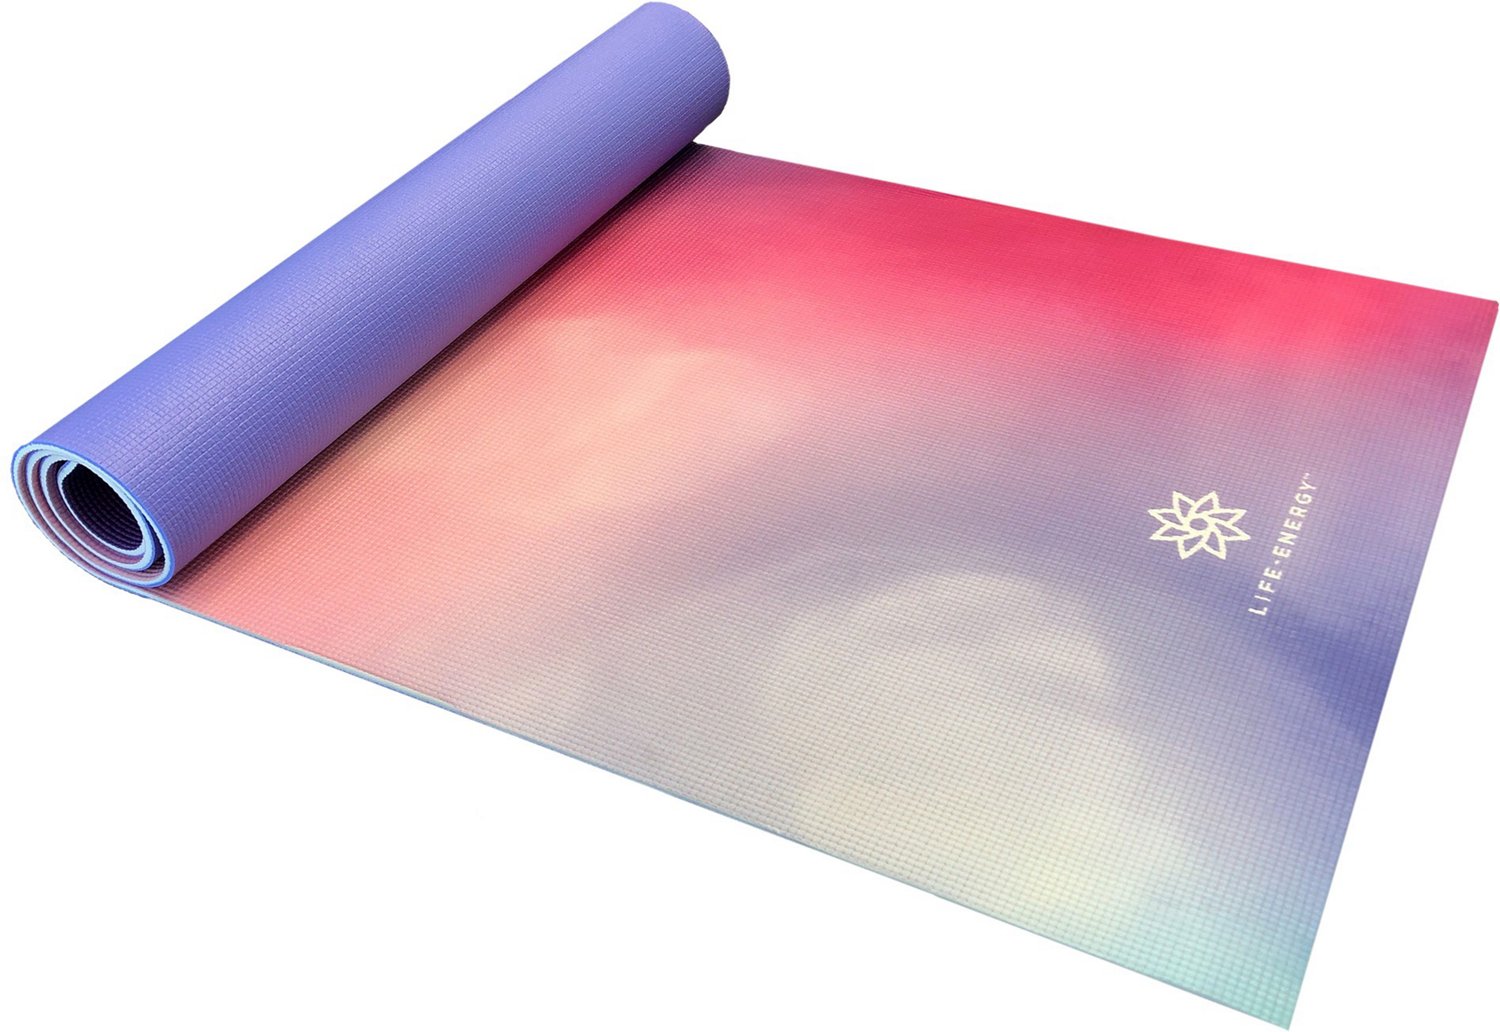 sports authority exercise mat